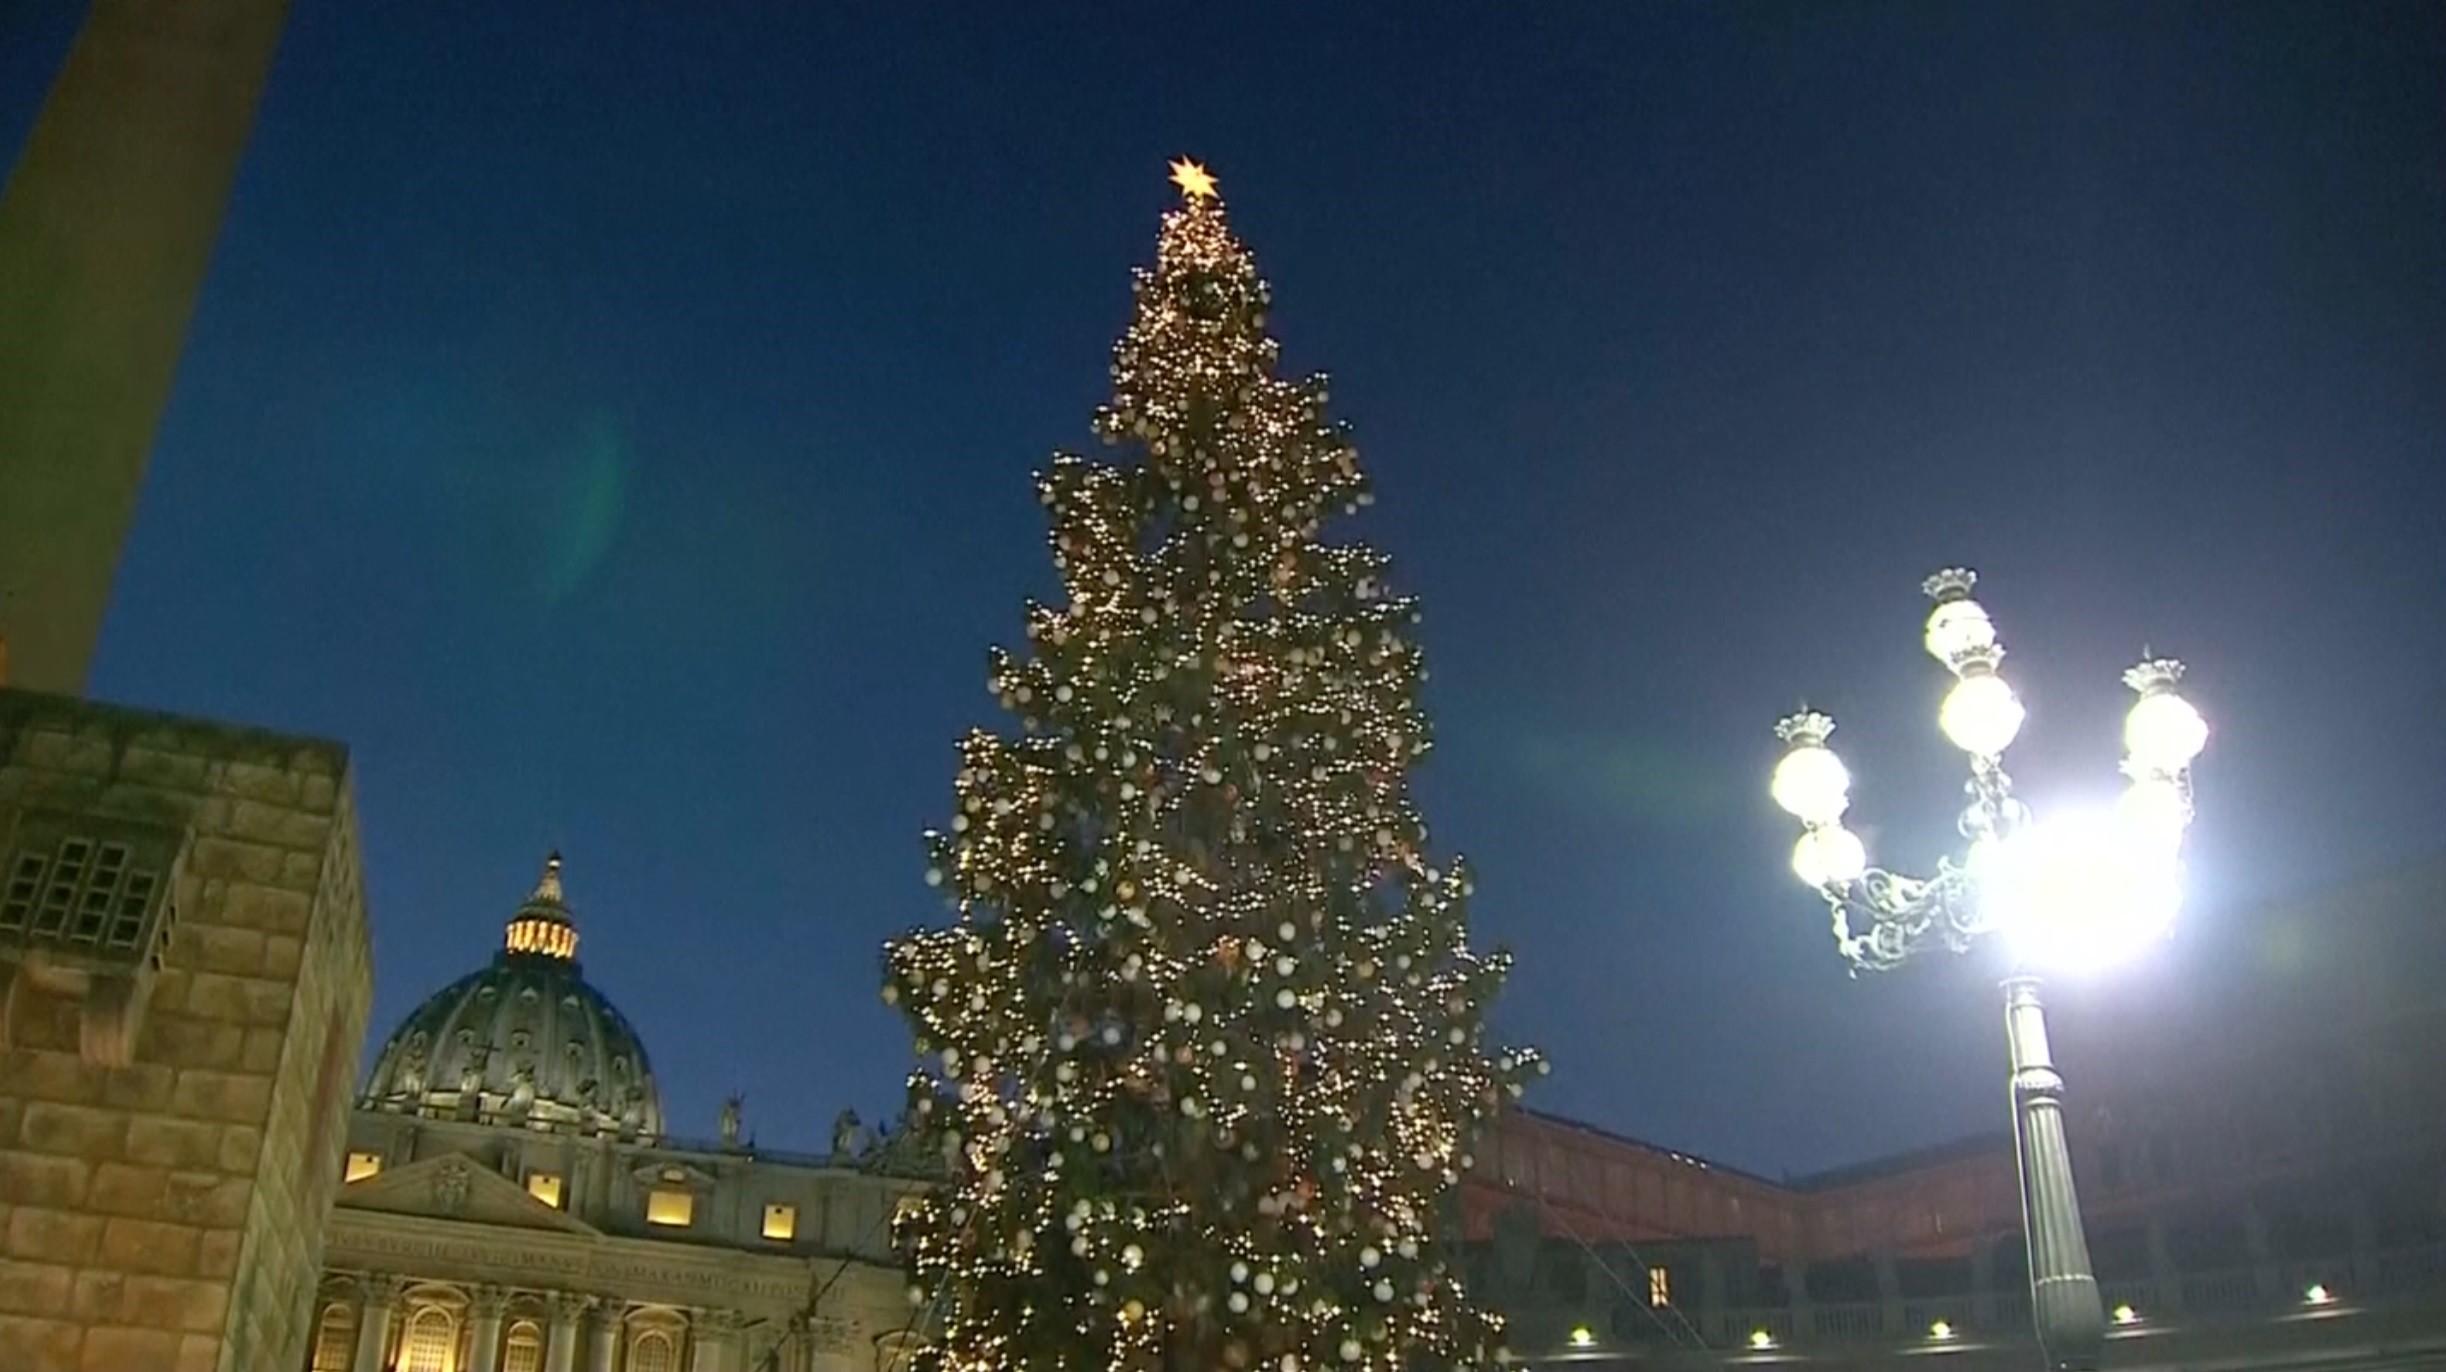 Vatican Christmas tree is lit in St. Peters Square, adorned with ornaments made from sick children across Italy and the nativity scene includes a spire